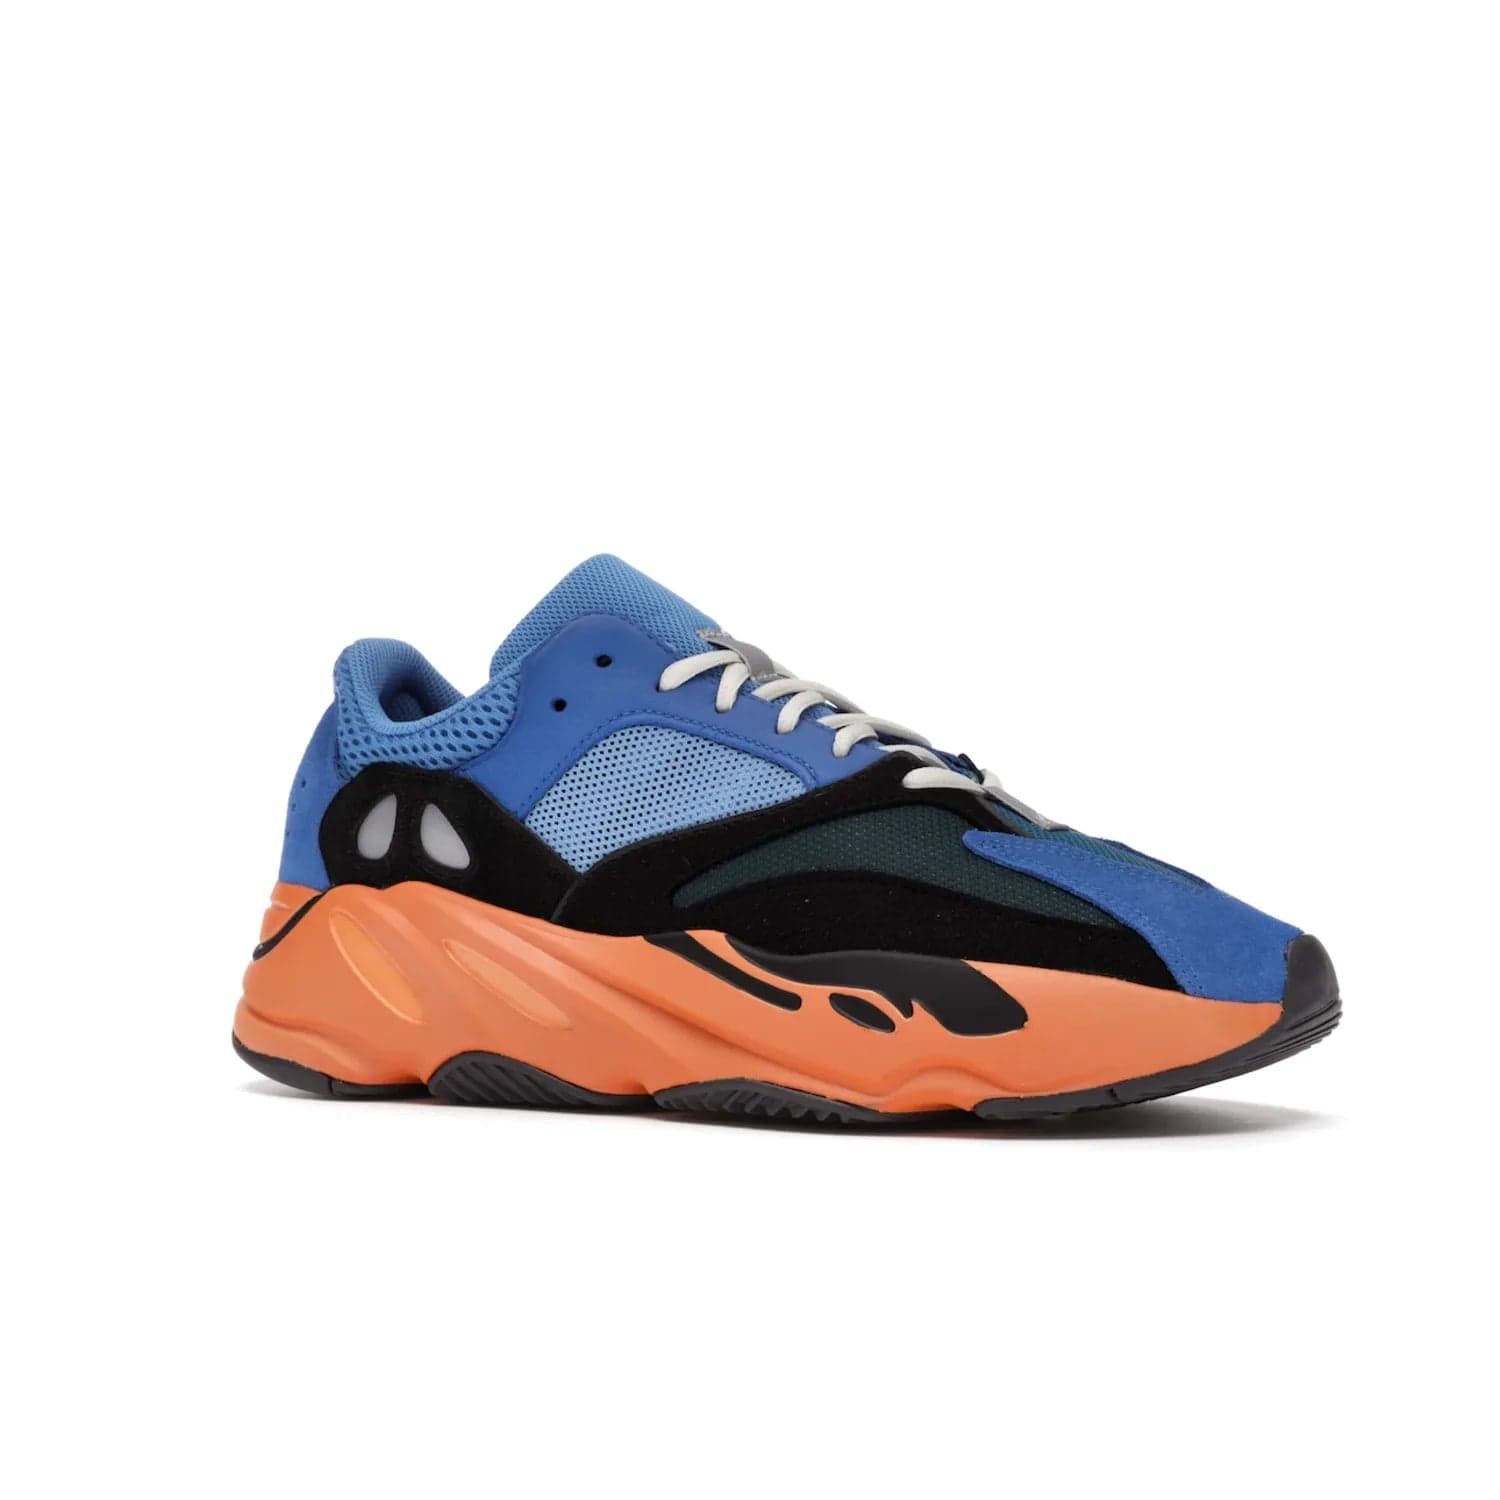 adidas Yeezy Boost 700 Bright Blue - Image 4 - Only at www.BallersClubKickz.com - Iconic sneaker style meets vibrant colour with the adidas Yeezy Boost 700 Bright Blue. Reflective accents, turquoise and teal panels, bright orange midsole and black outsole make for a bold release. April 2021.